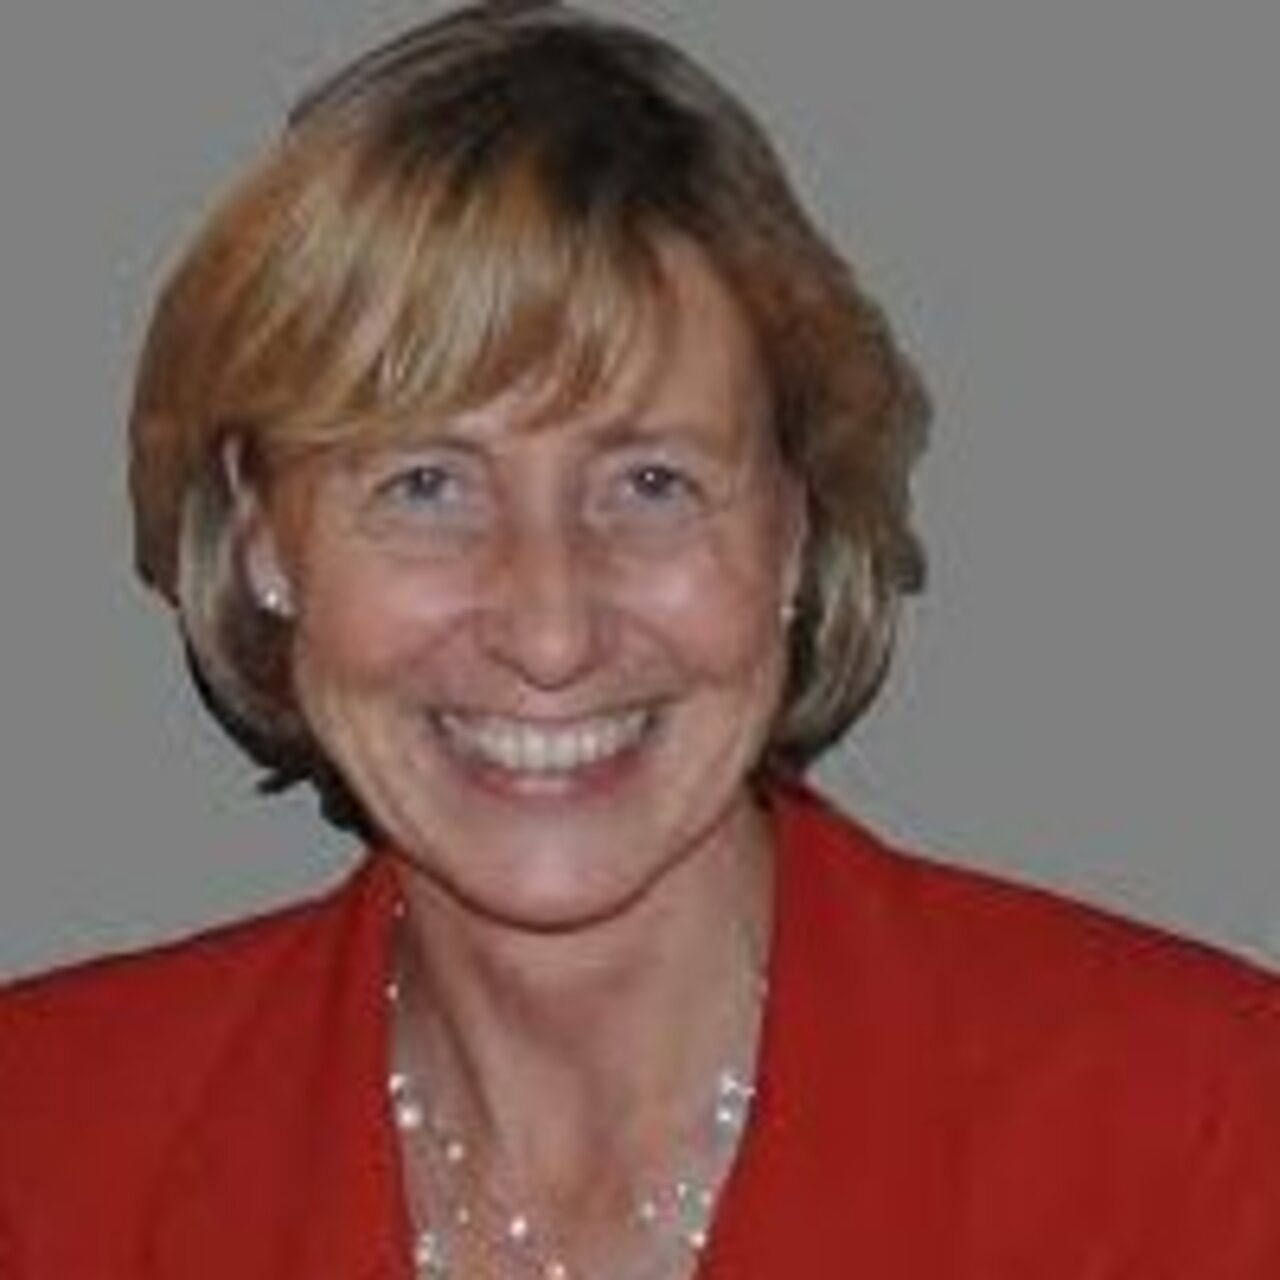 Linda Strick will be part of #public #procurement of #cloud services in #Europe http://ow.ly/YwNpa https://t.co/3V557hRgFx